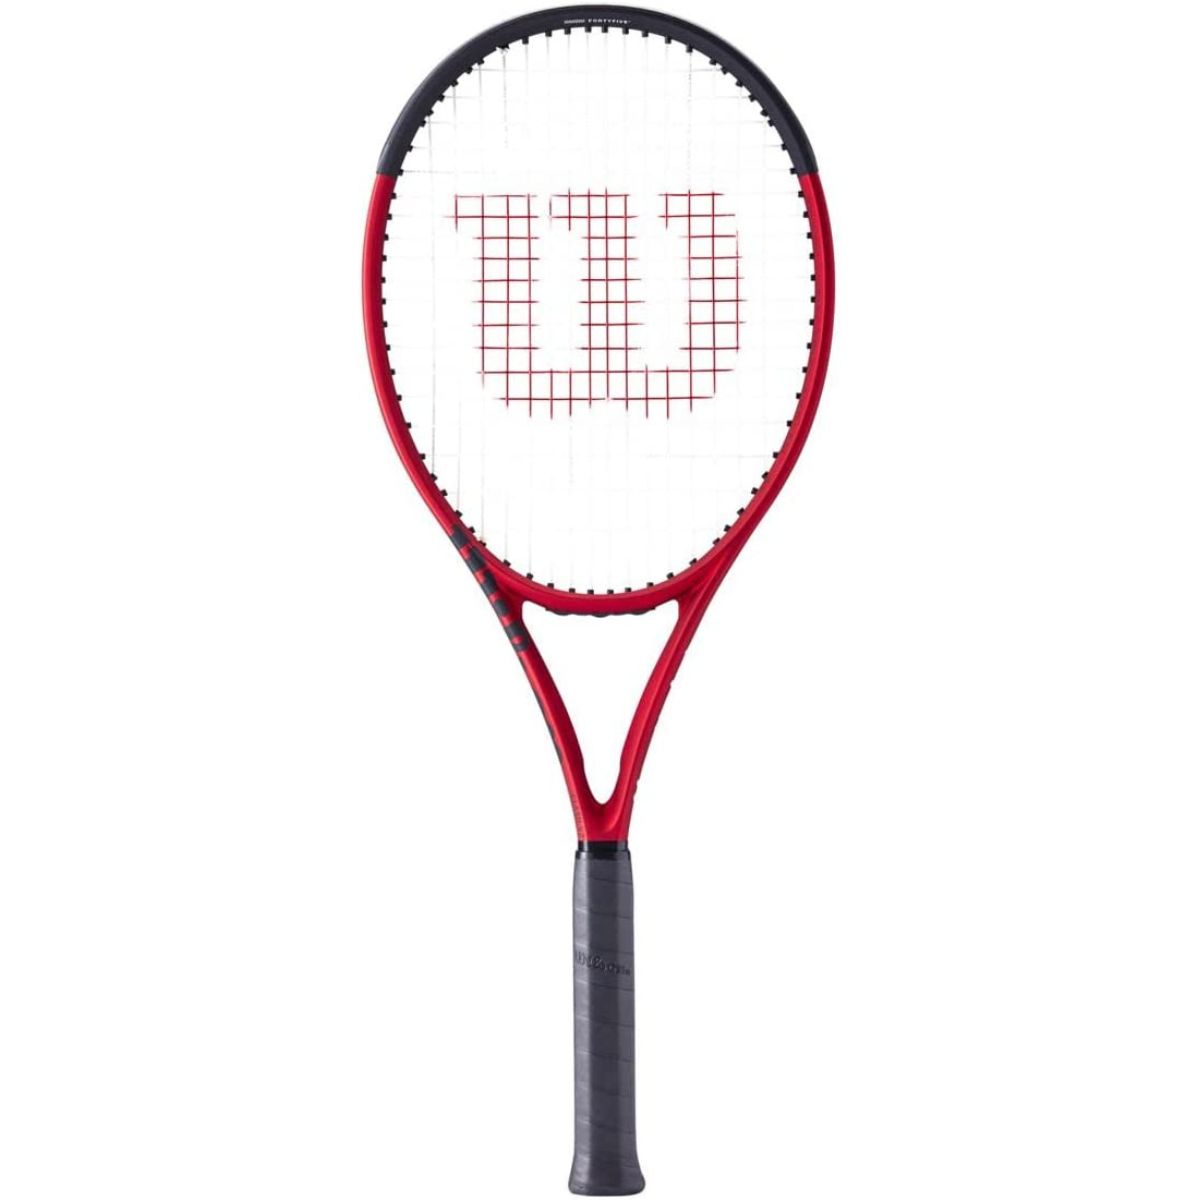 The Best Tennis Rackets for Doubles Options: Wilson Clash 100